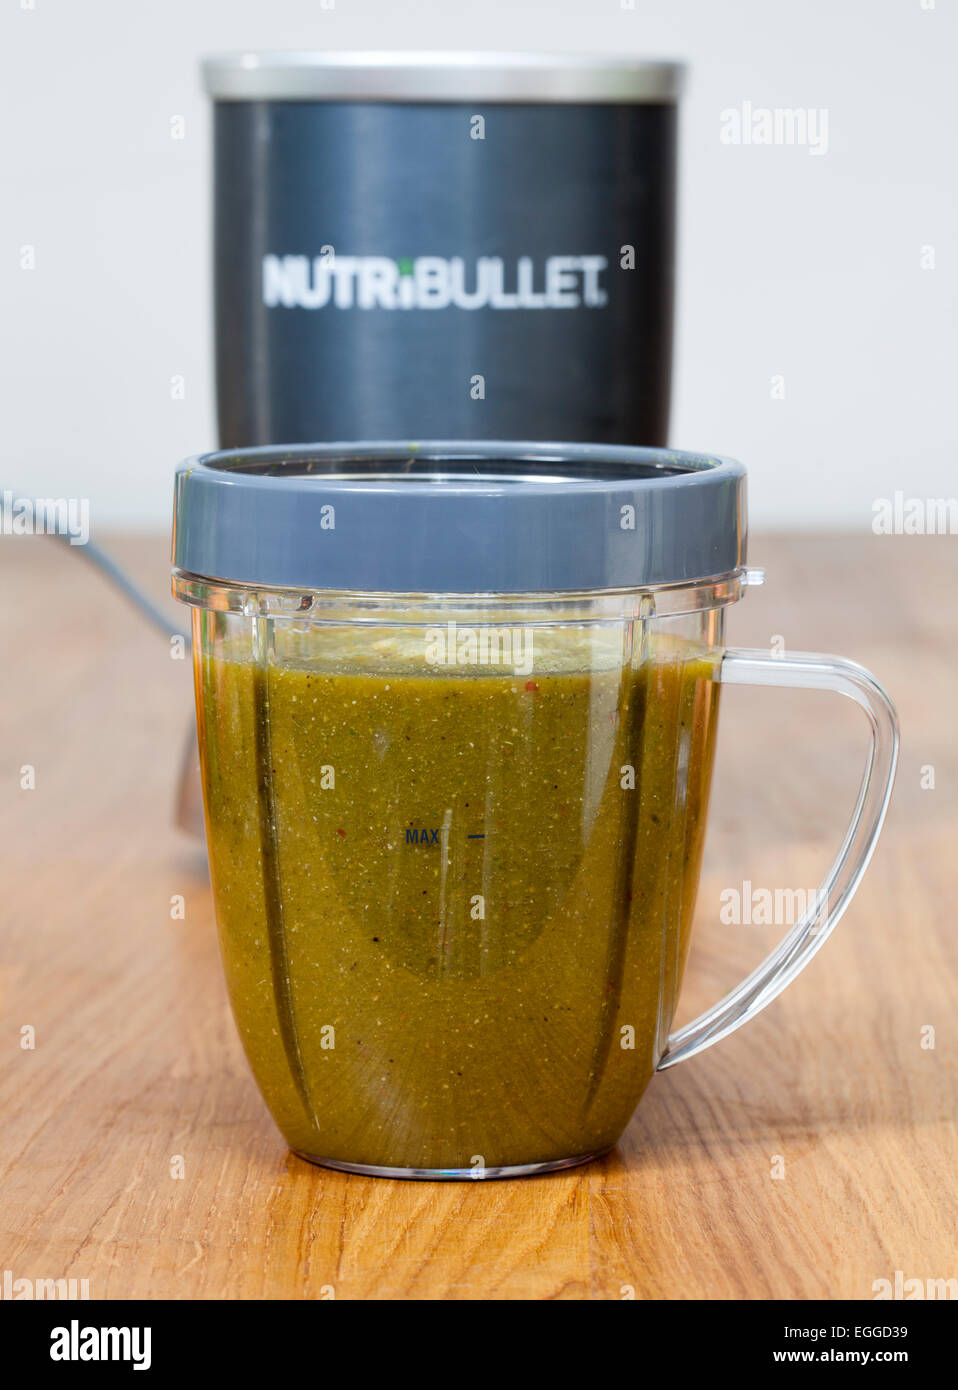 Nutribullet Food Extractor showing fruit and vegetable extraction mixture Stock Photo